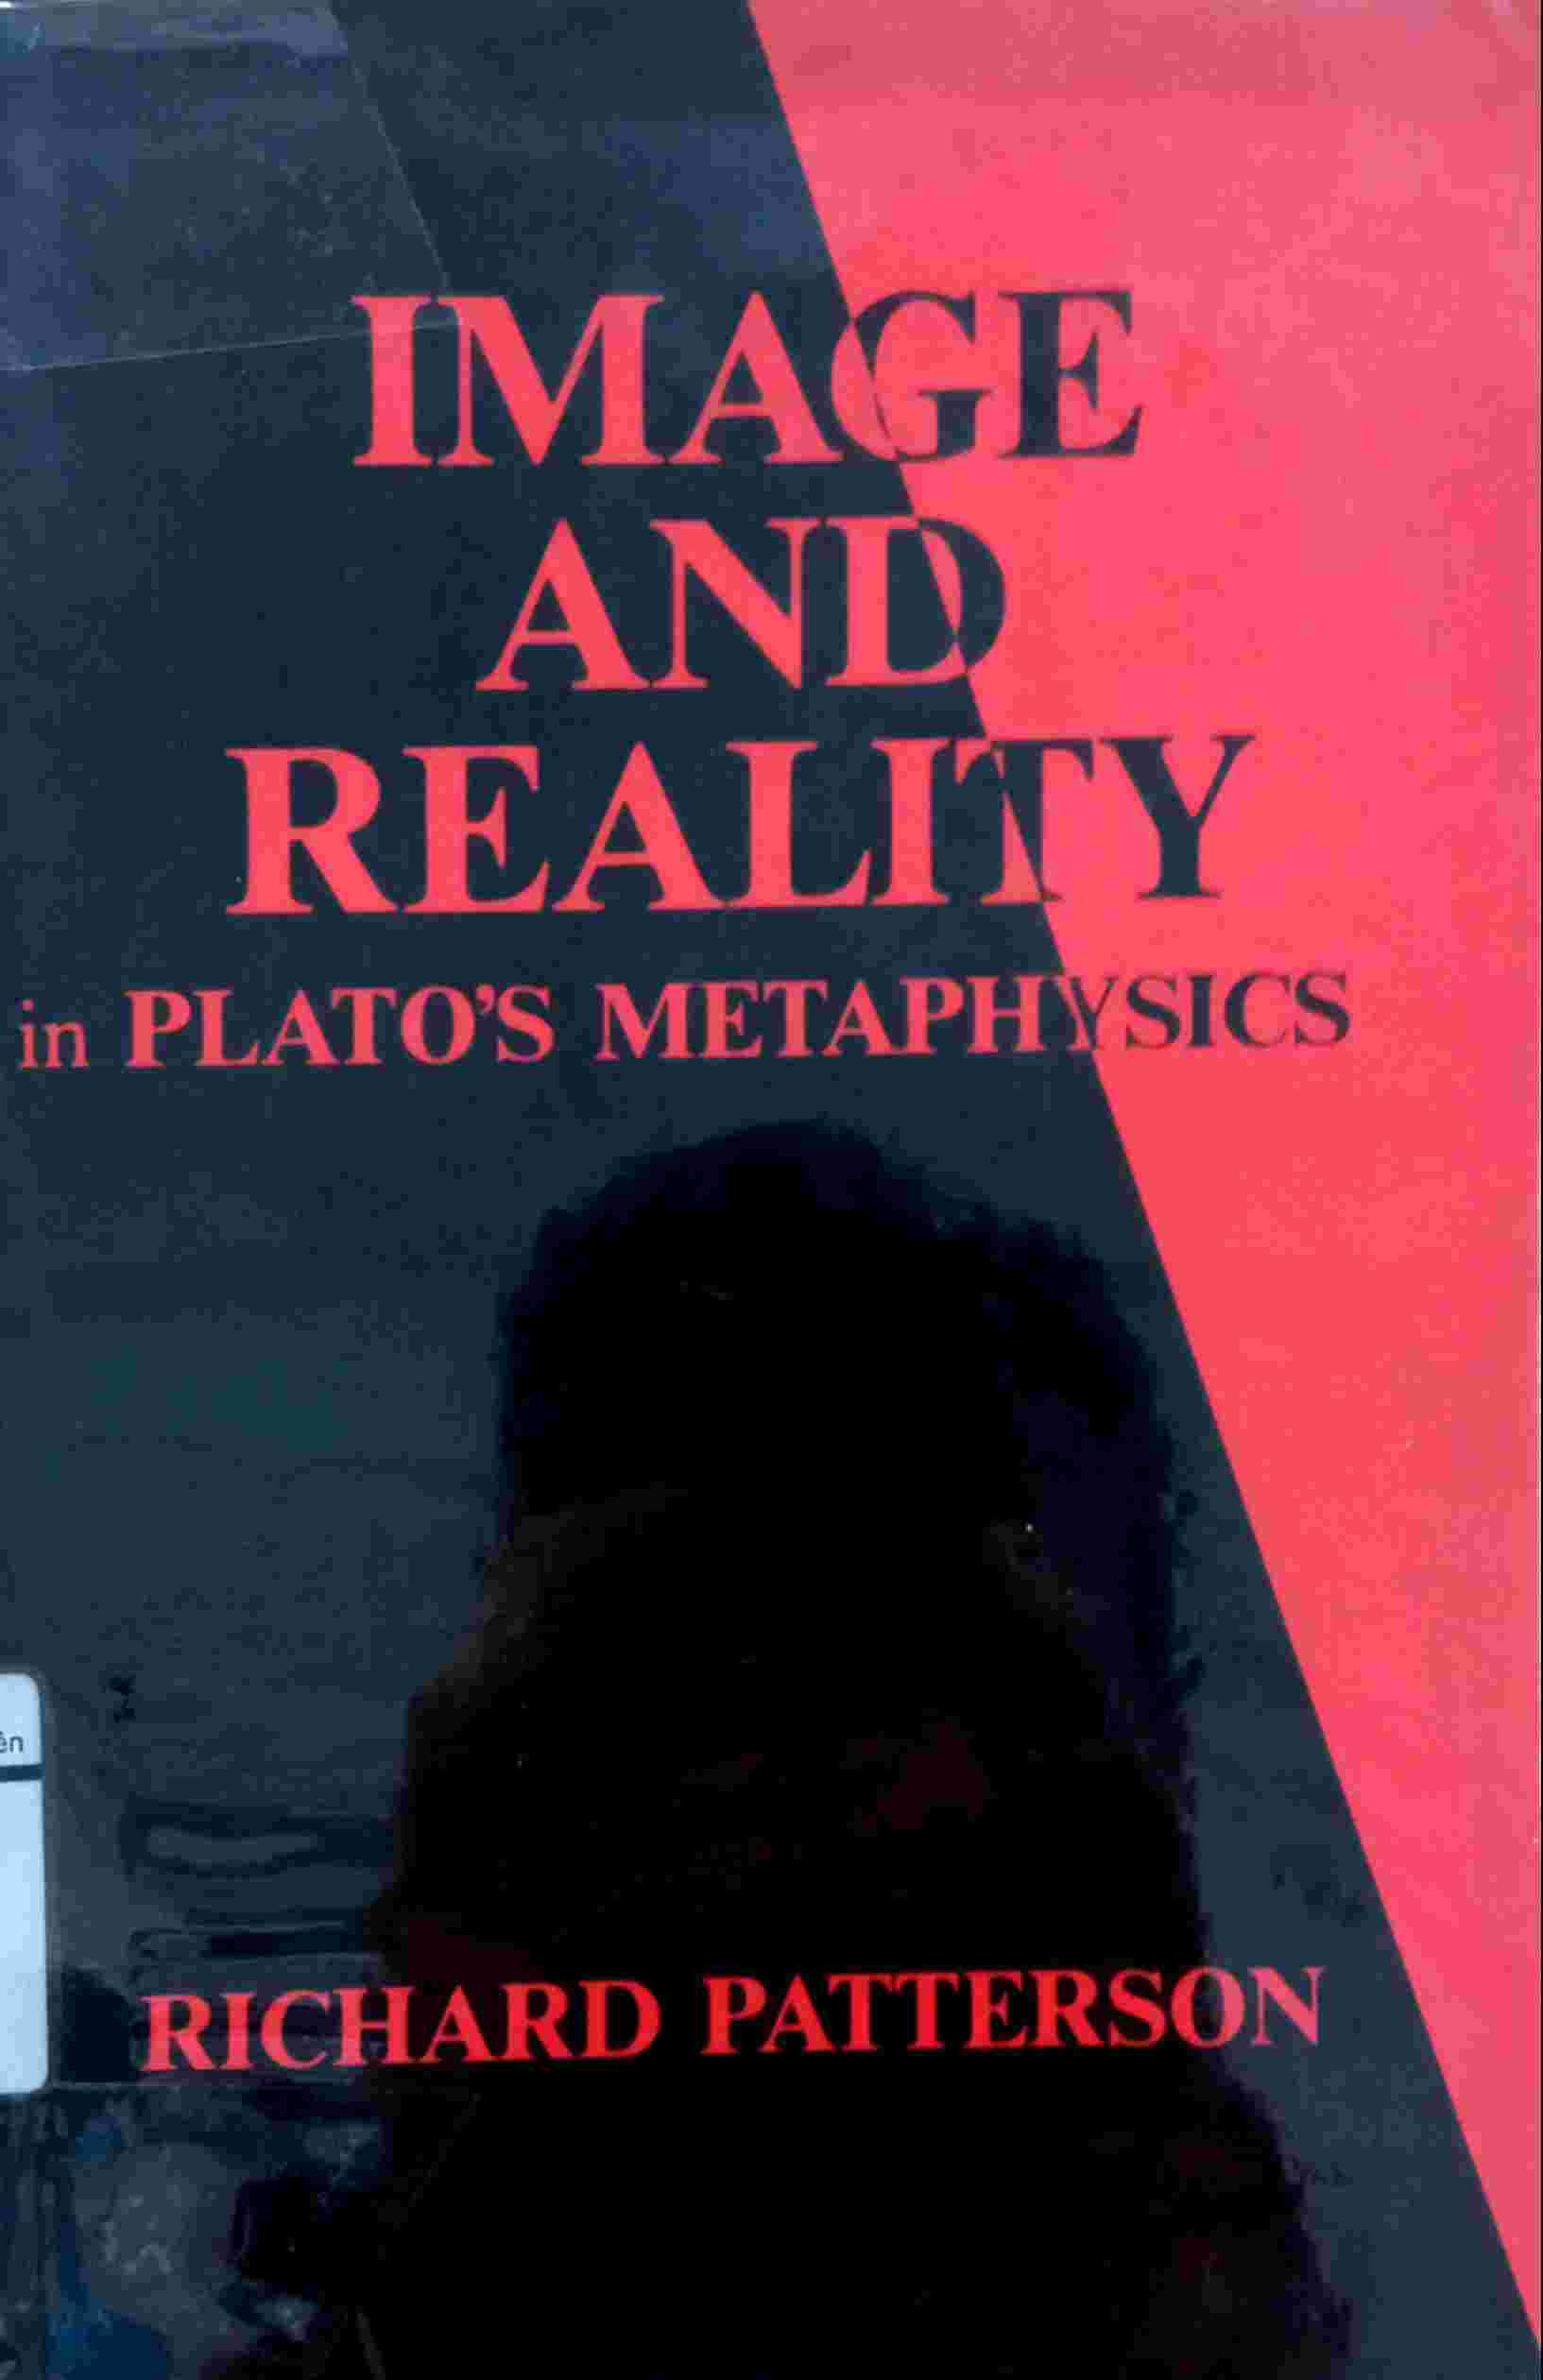 IMAGE AND REALITY IN PLATO's METAPHYSICS